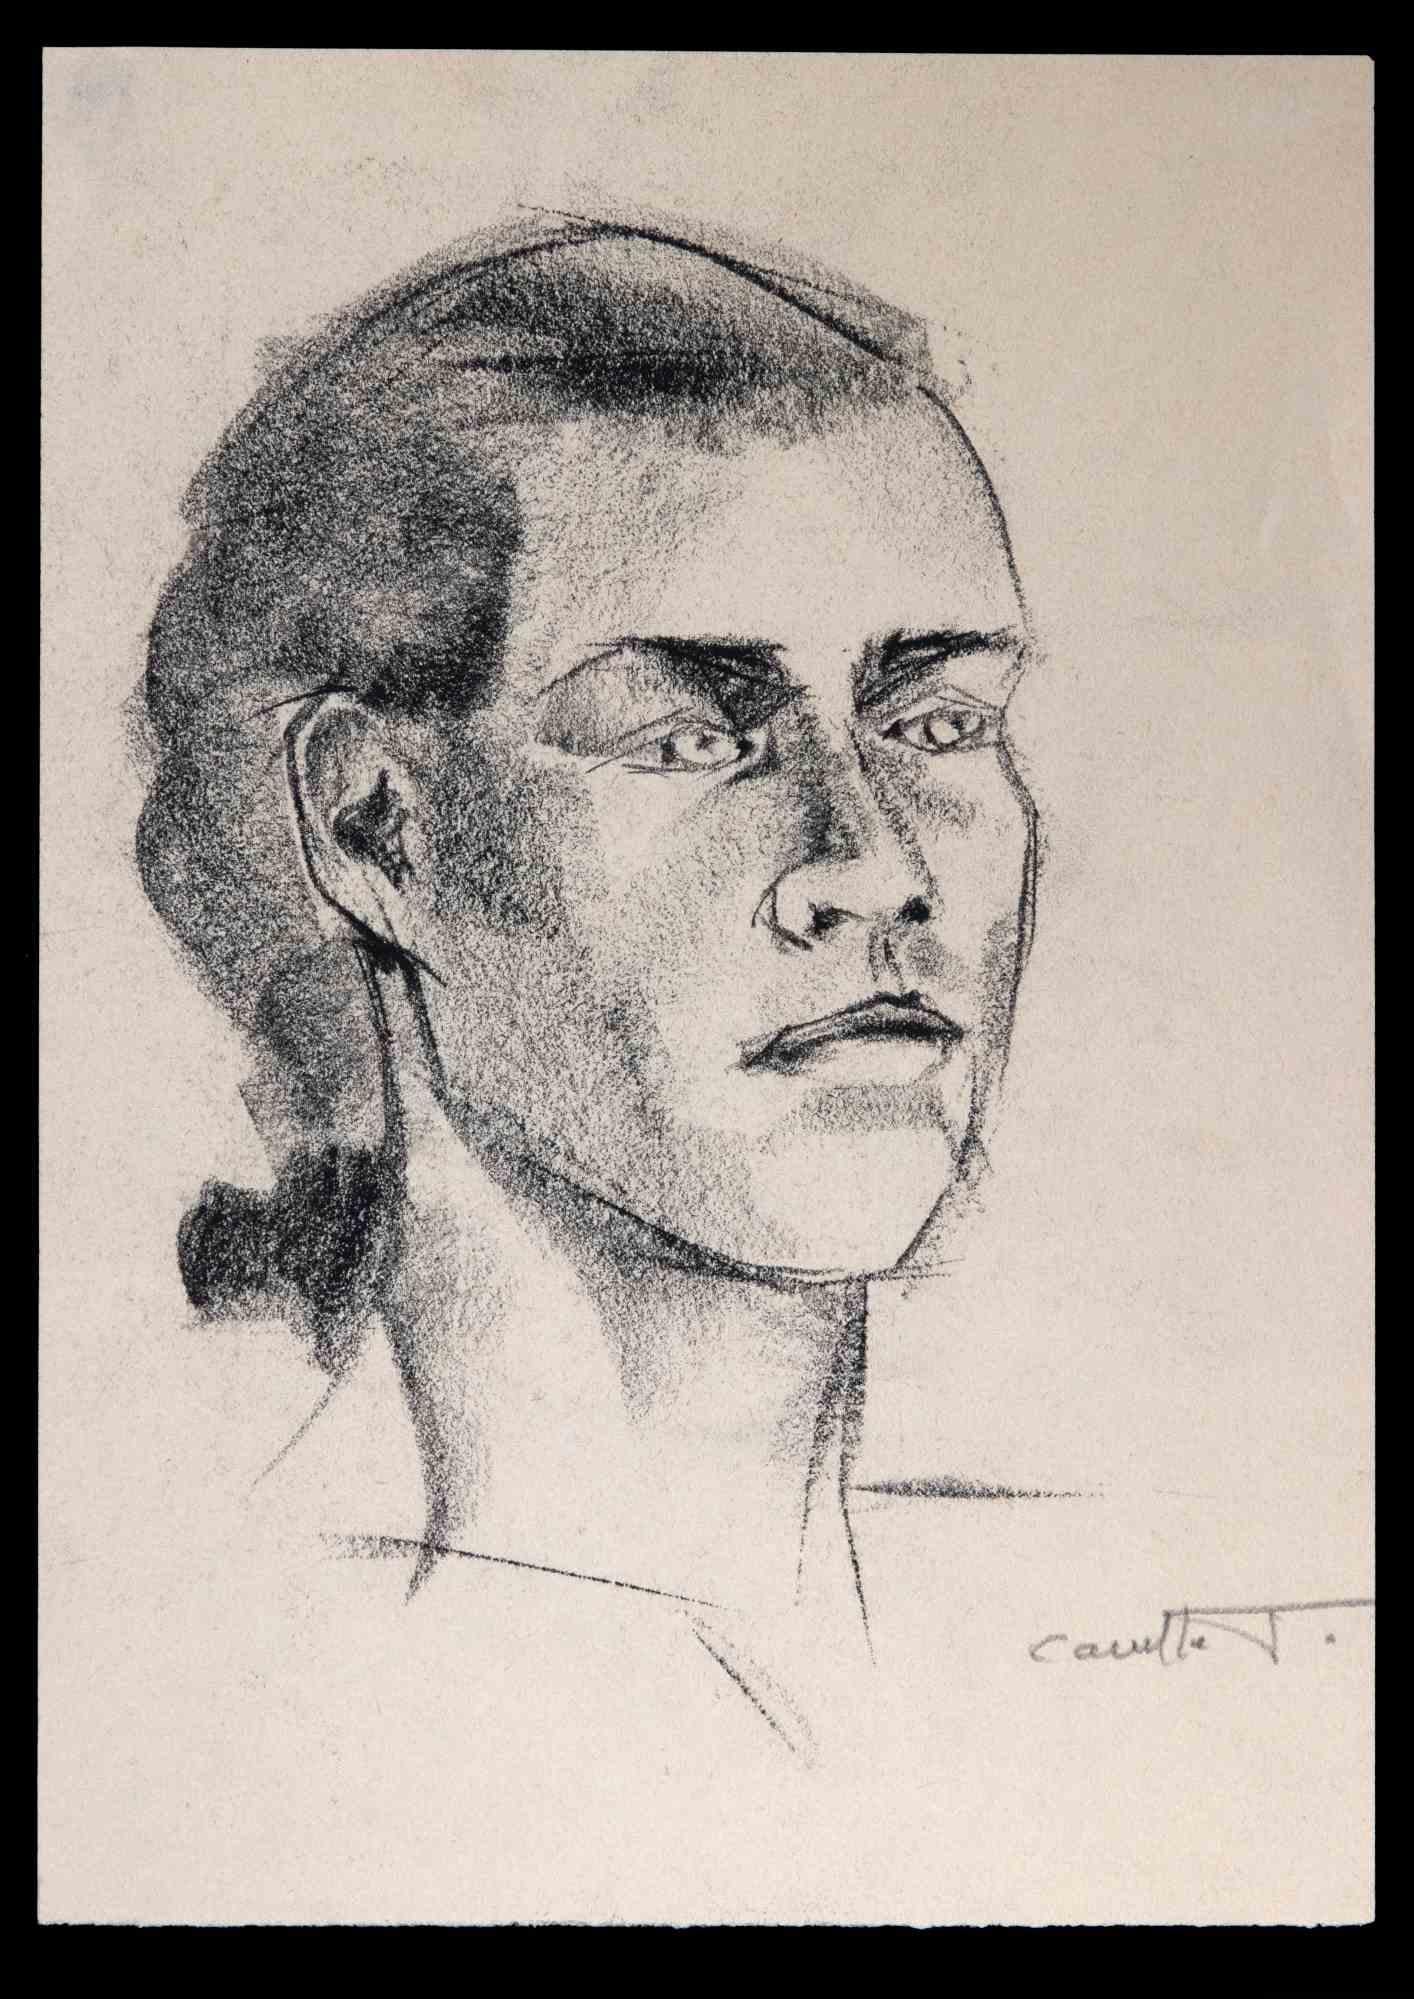 Portrait of a Woman is an Original Charcoal Drawing realized by an unknown French Artist in the mid-20th Century.

The artwork is in good condition on a yellowed paper.

Hand-signed by the artist on the lower right corner.